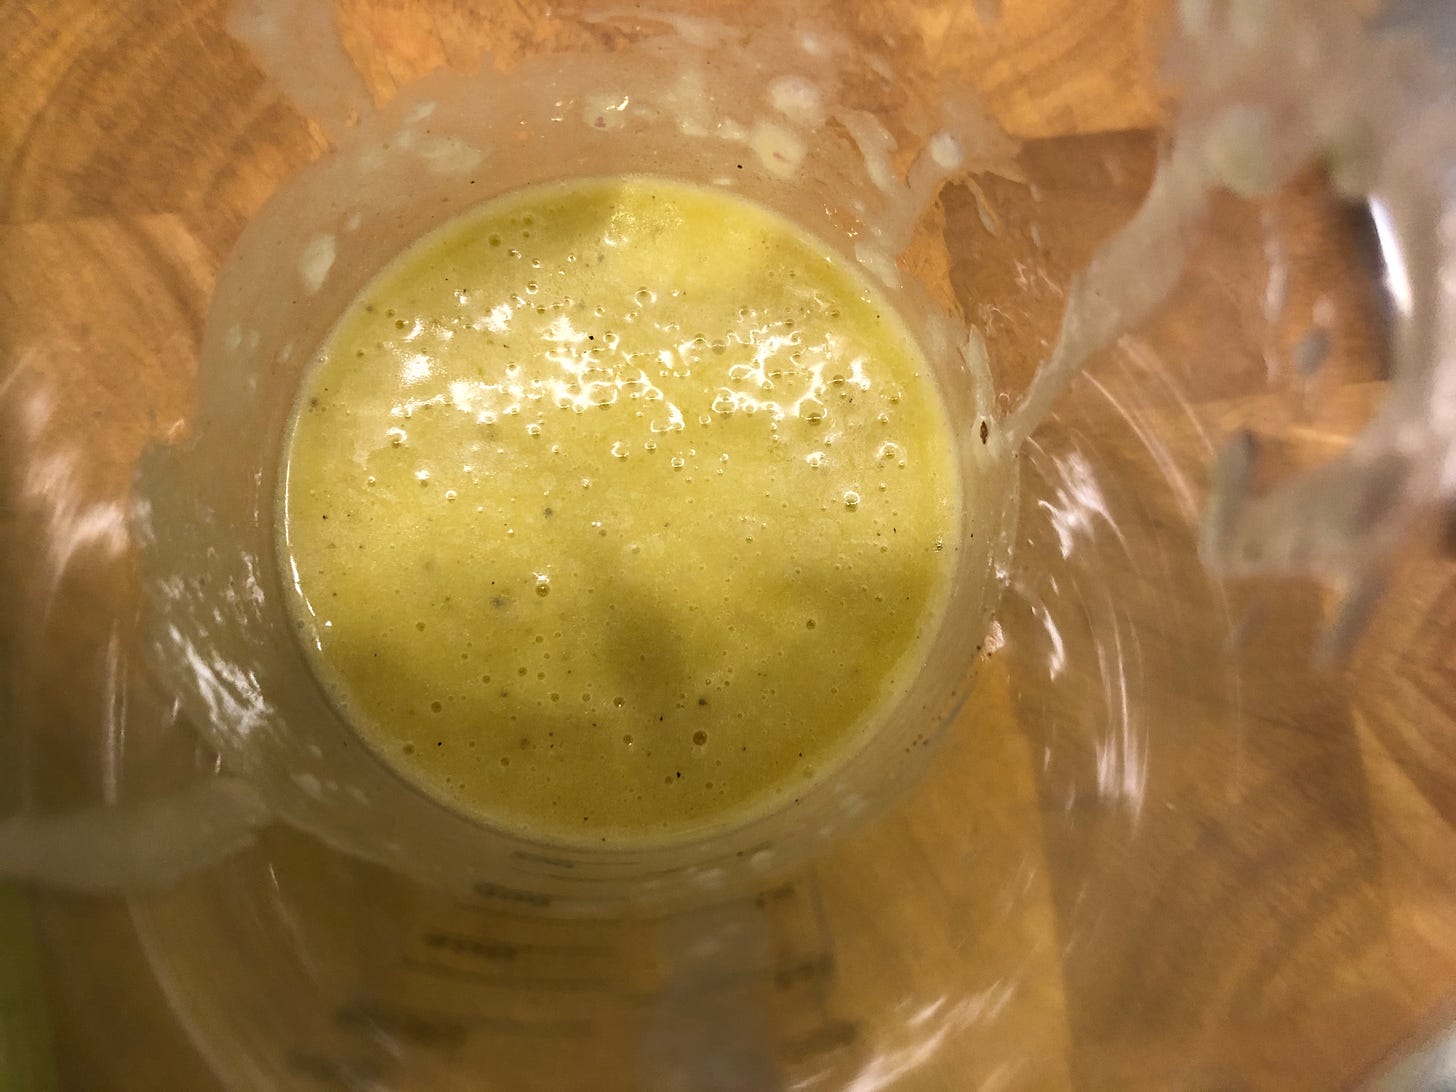 Finished vinaigrette is smooth, stable, and creamy.